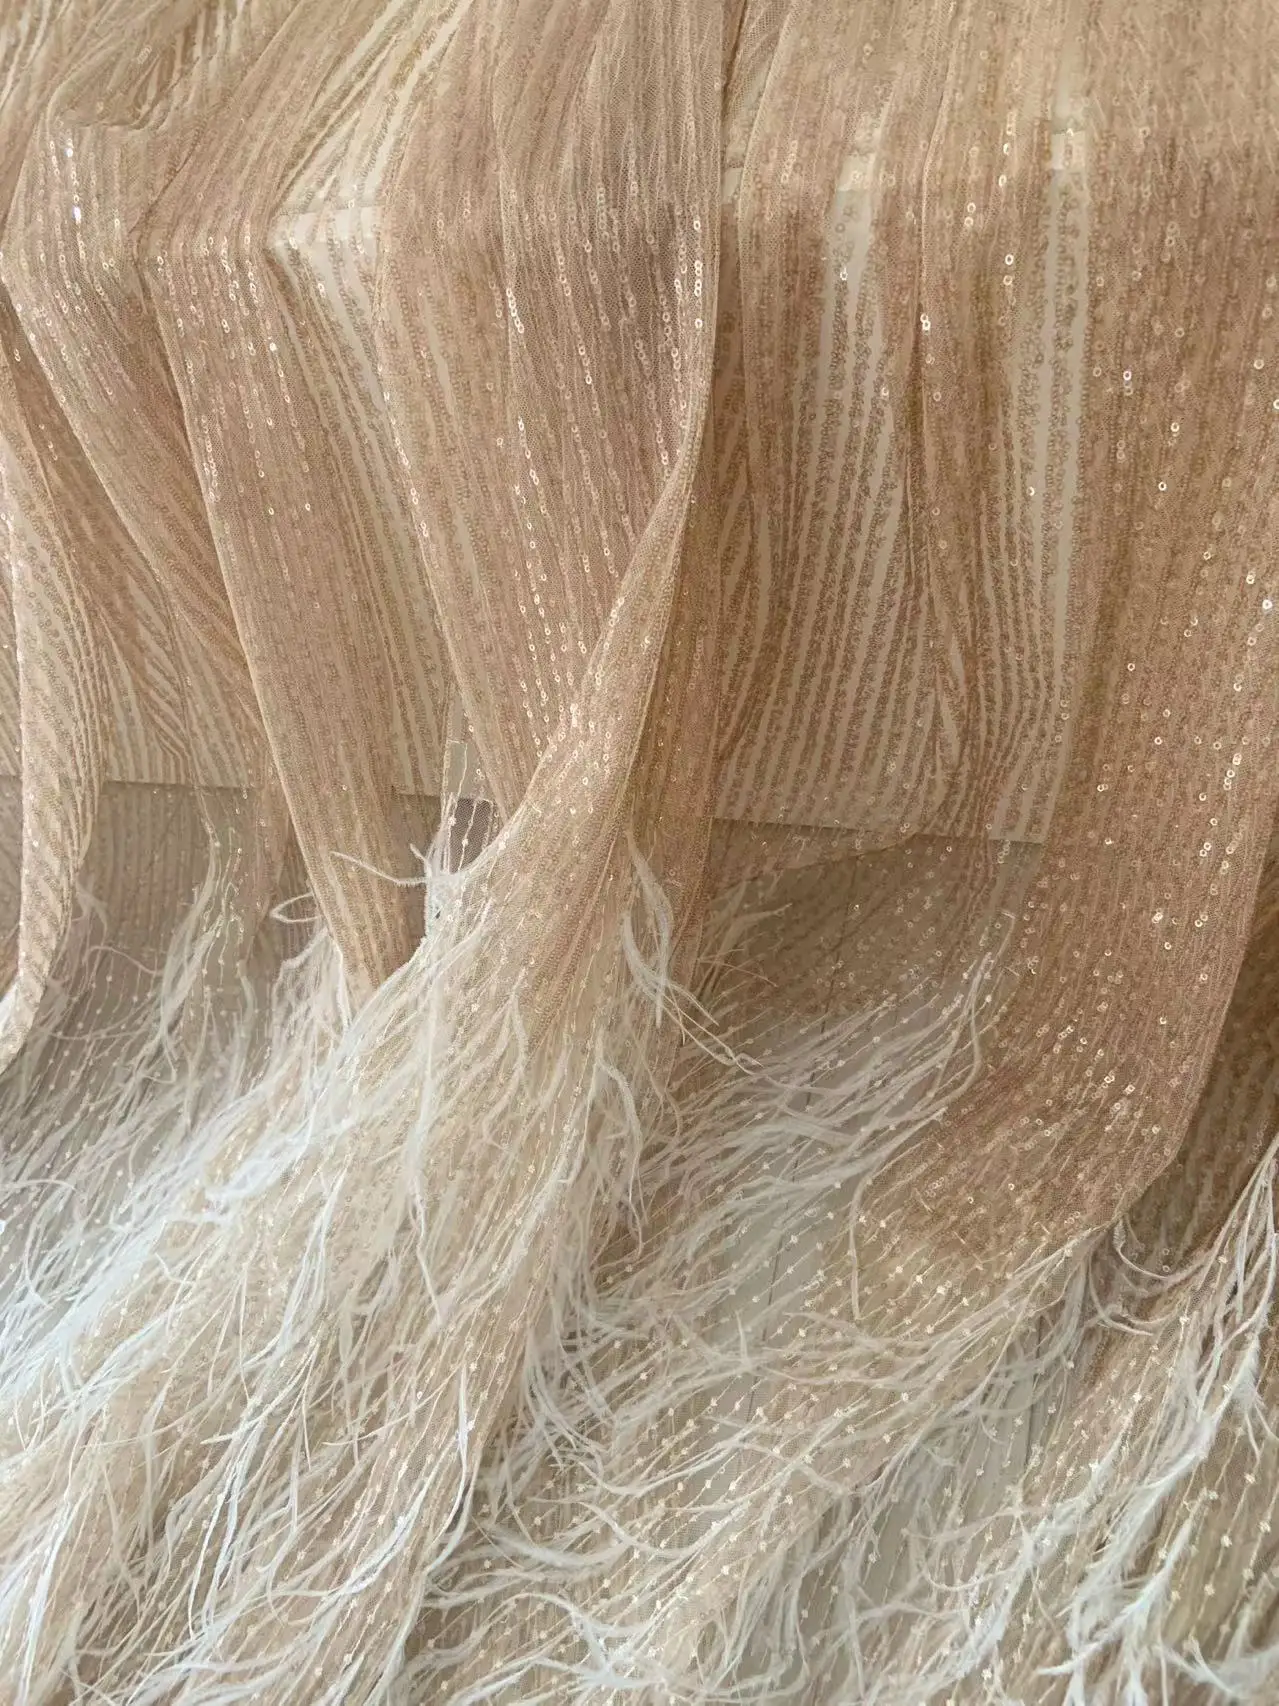 Deluxe1 Yard Rose Gold Plumes Fringe Tulle Lace Fabric with Sparkling Sequined Mest for Bridal Decor,Couture Dress Accessories